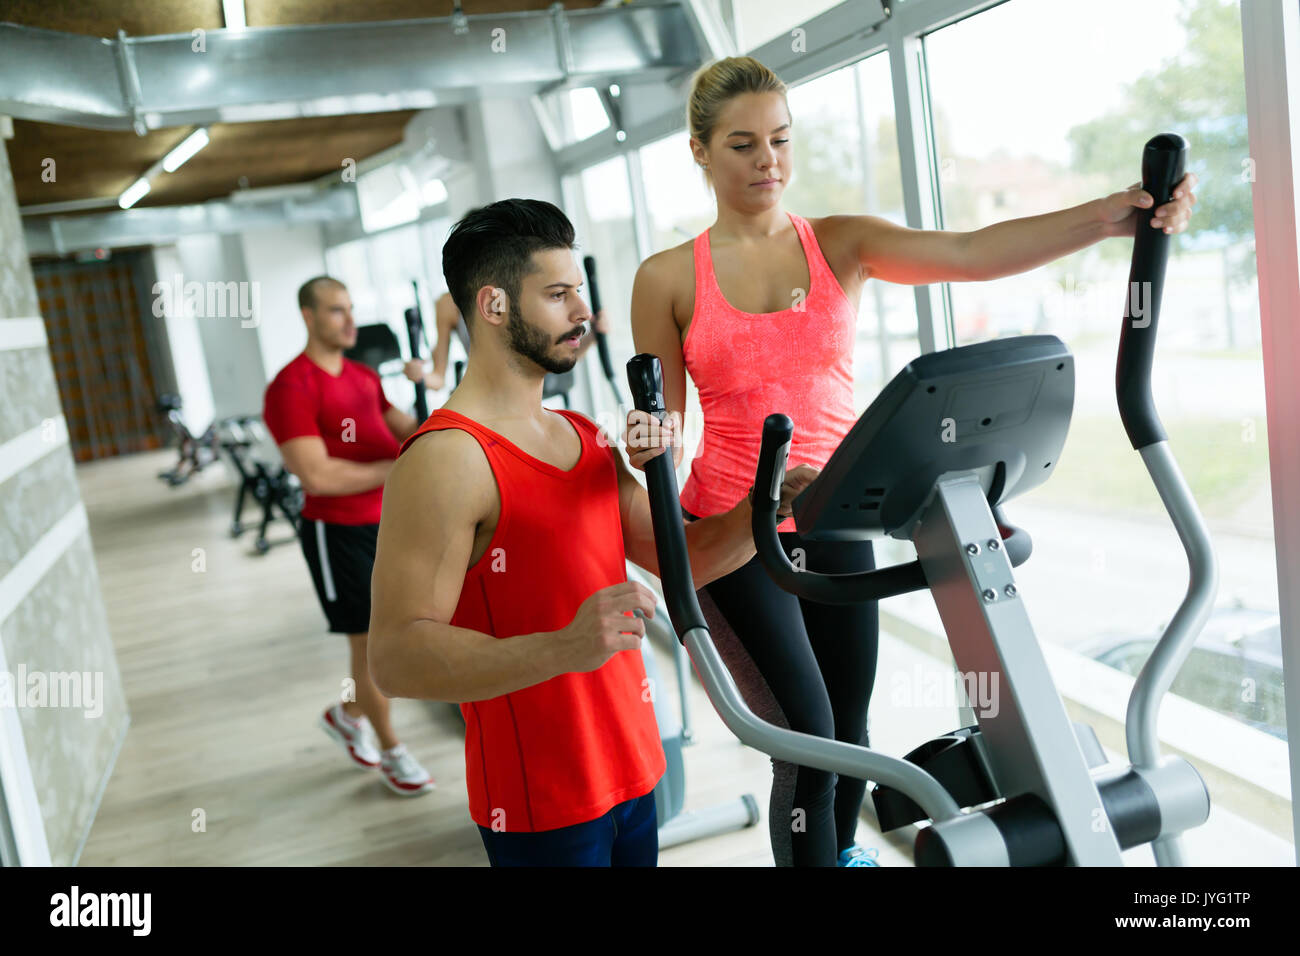 Attractive woman working cardio exercises with trainer Stock Photo